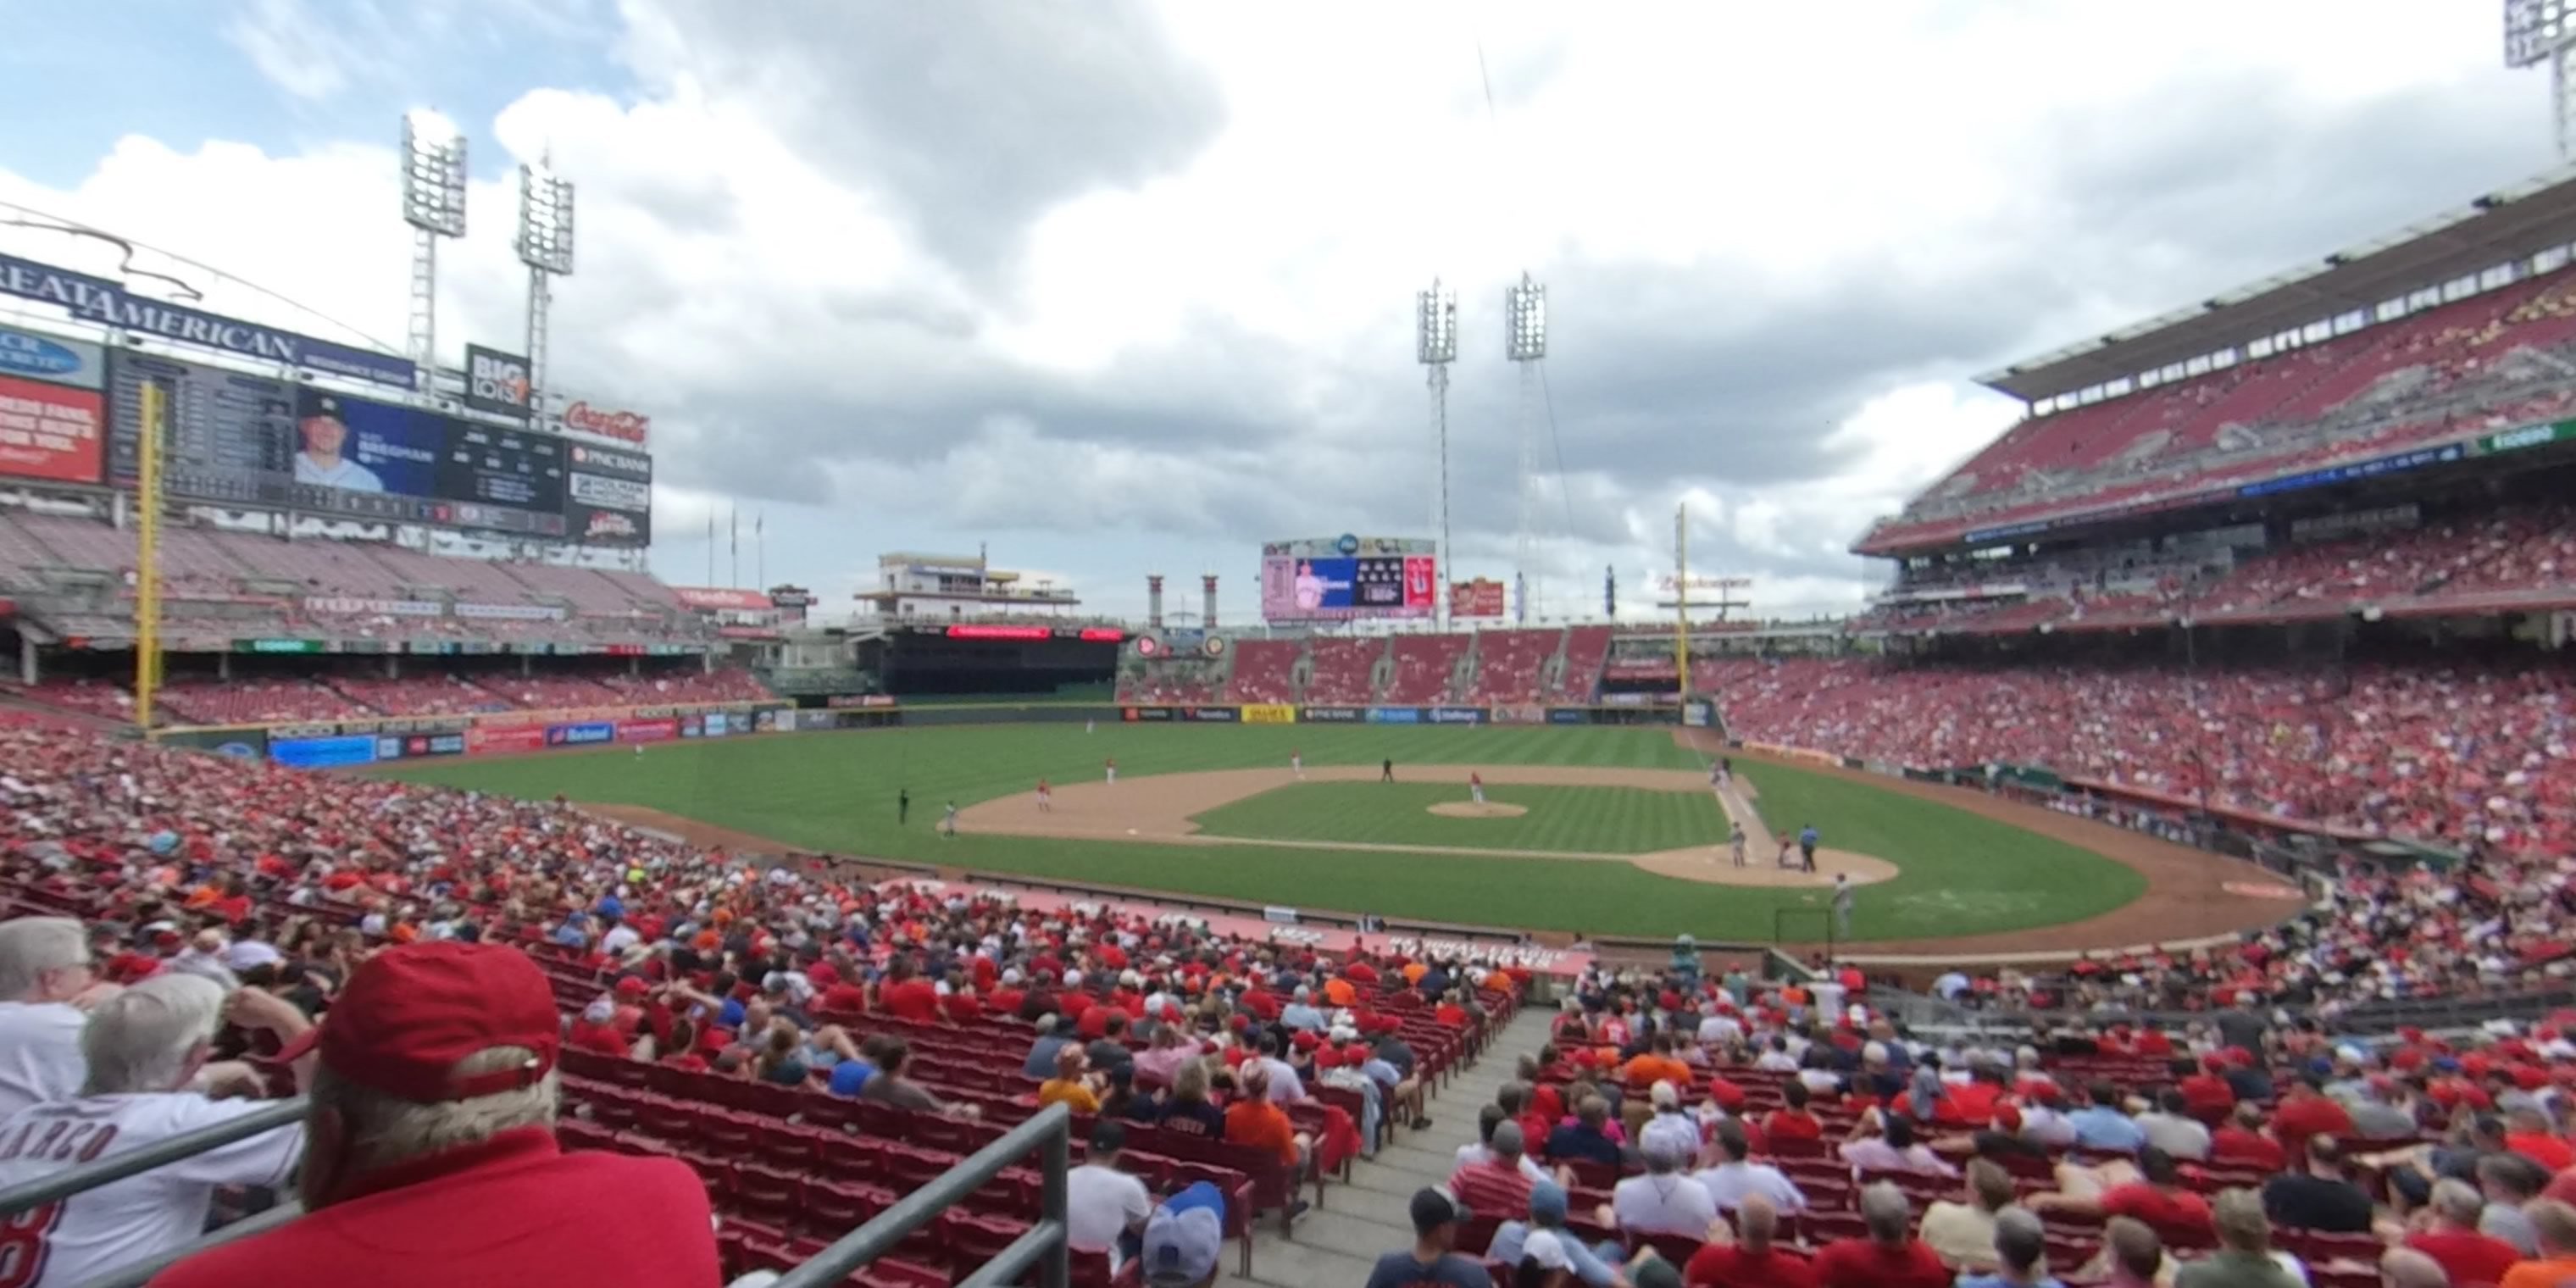 section 118 panoramic seat view  for baseball - great american ball park